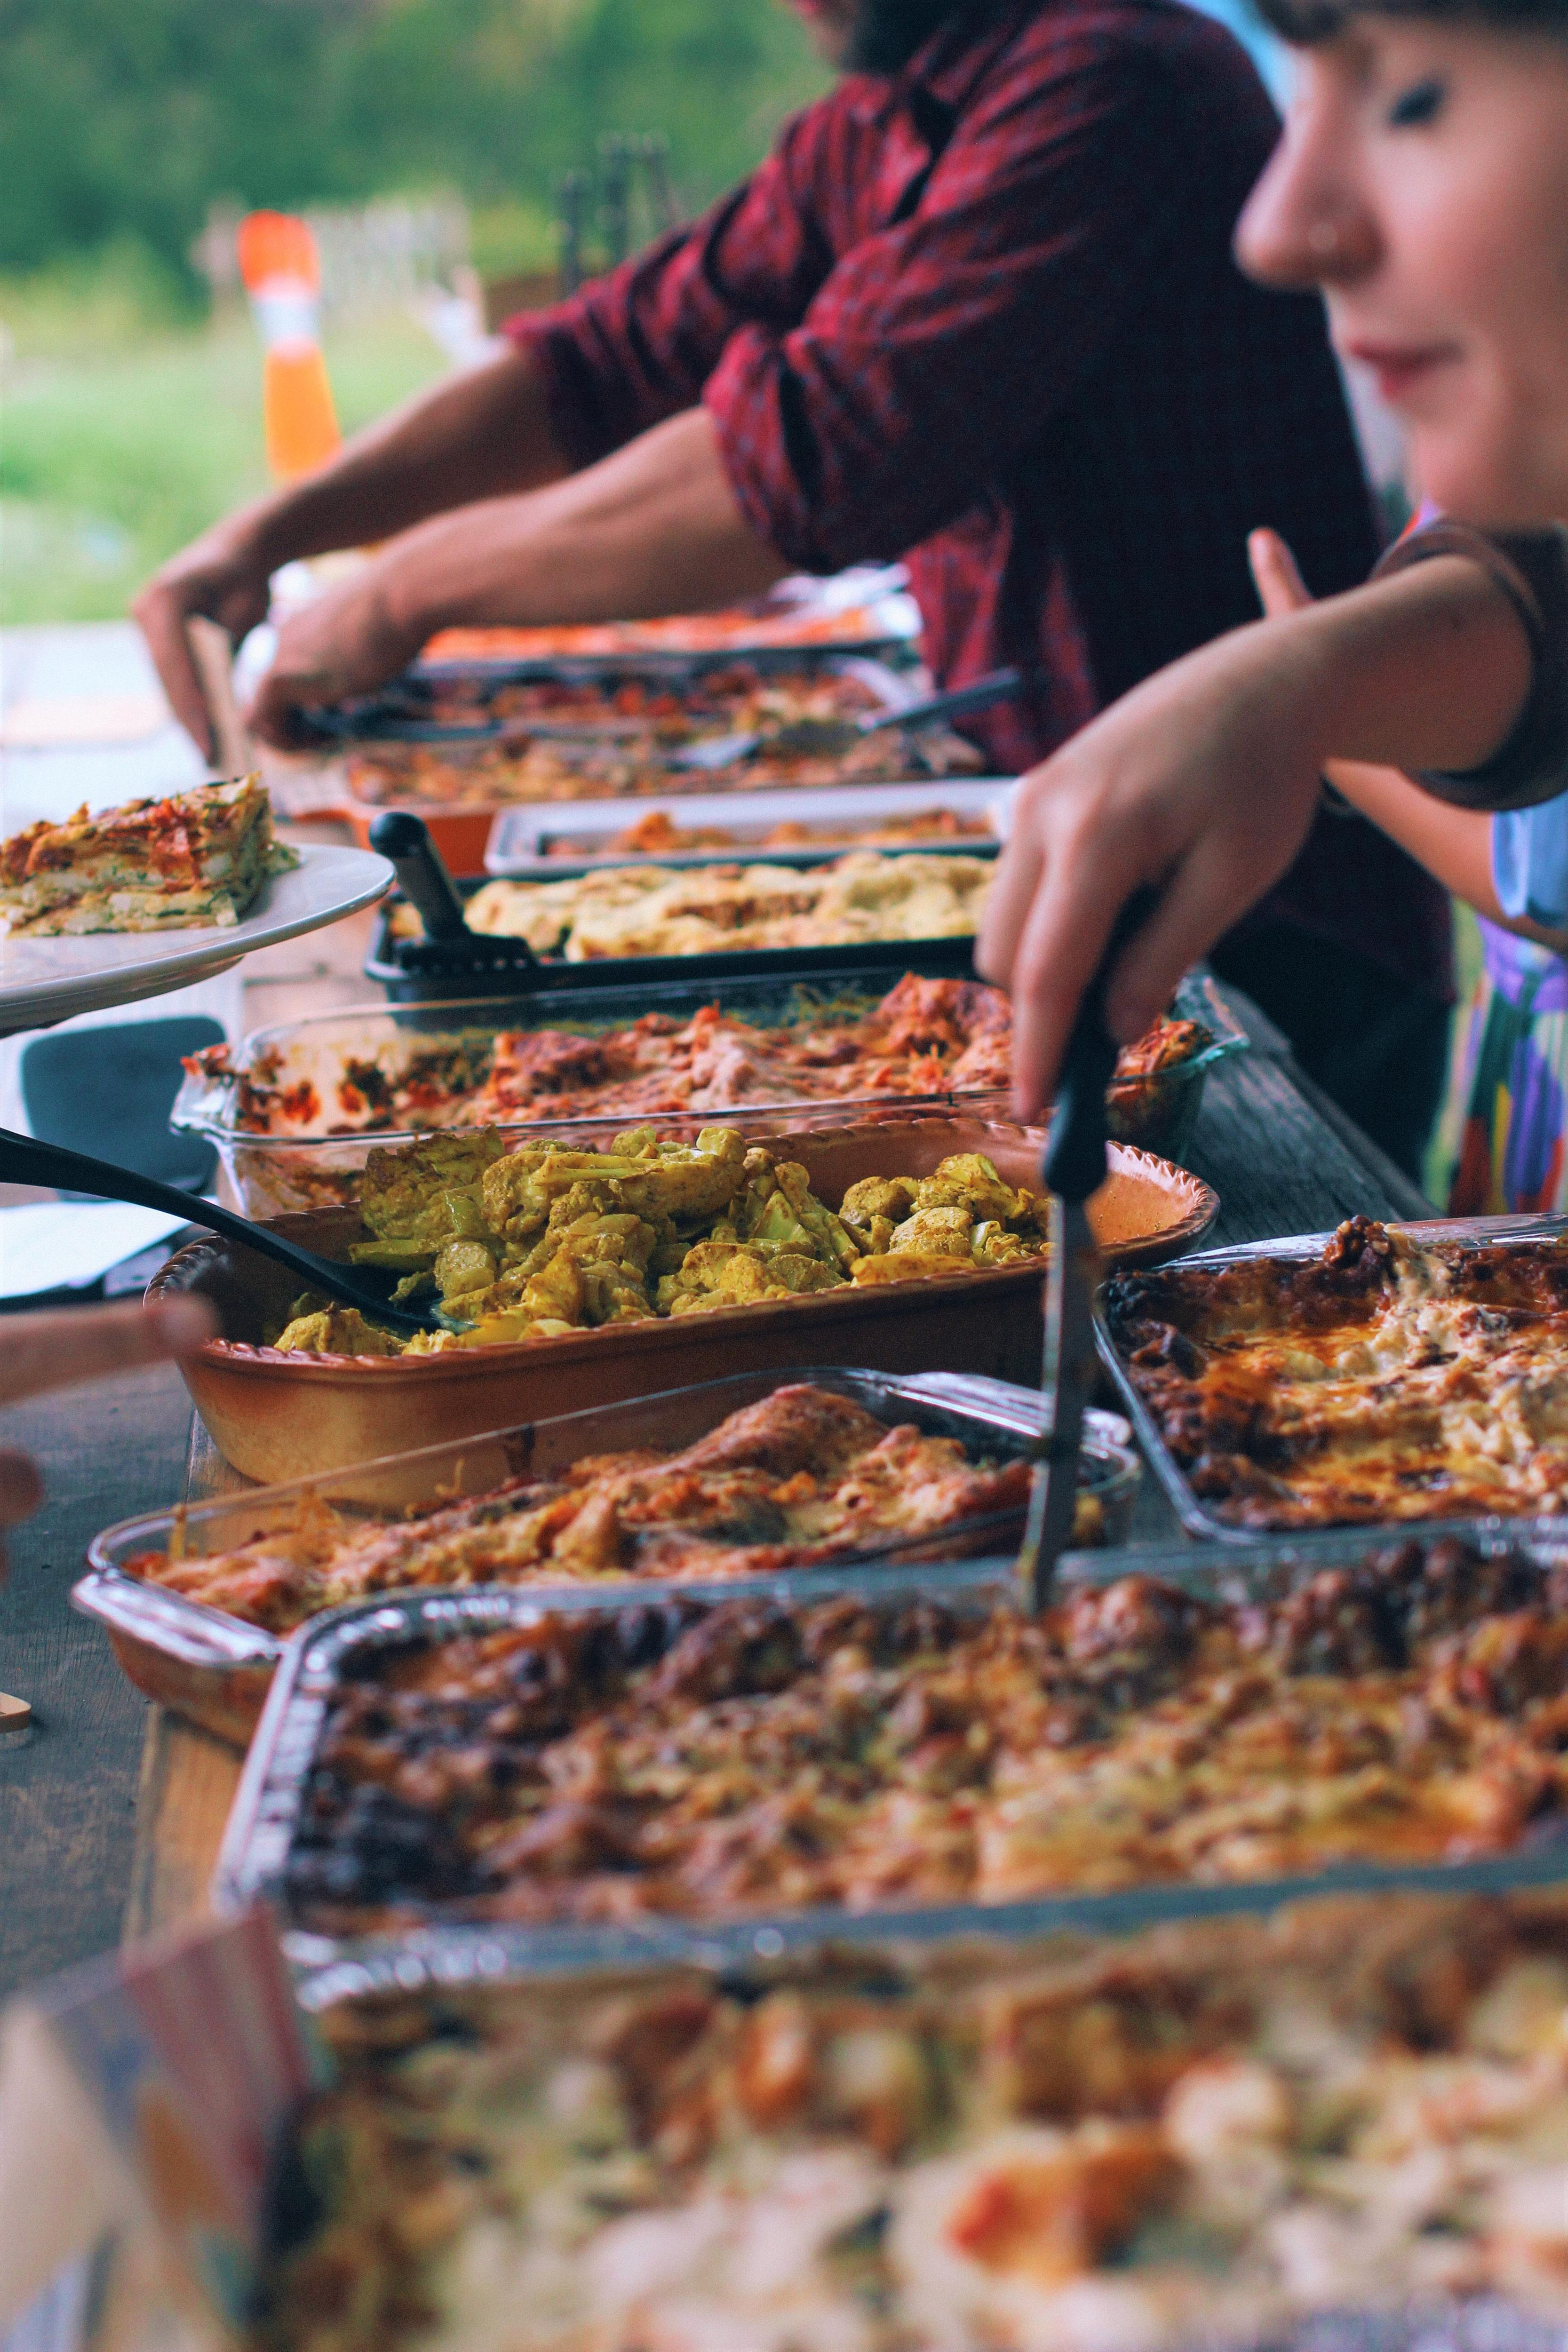 A row of lasagnes on a table with hands reaching in holding a spatula to serve it